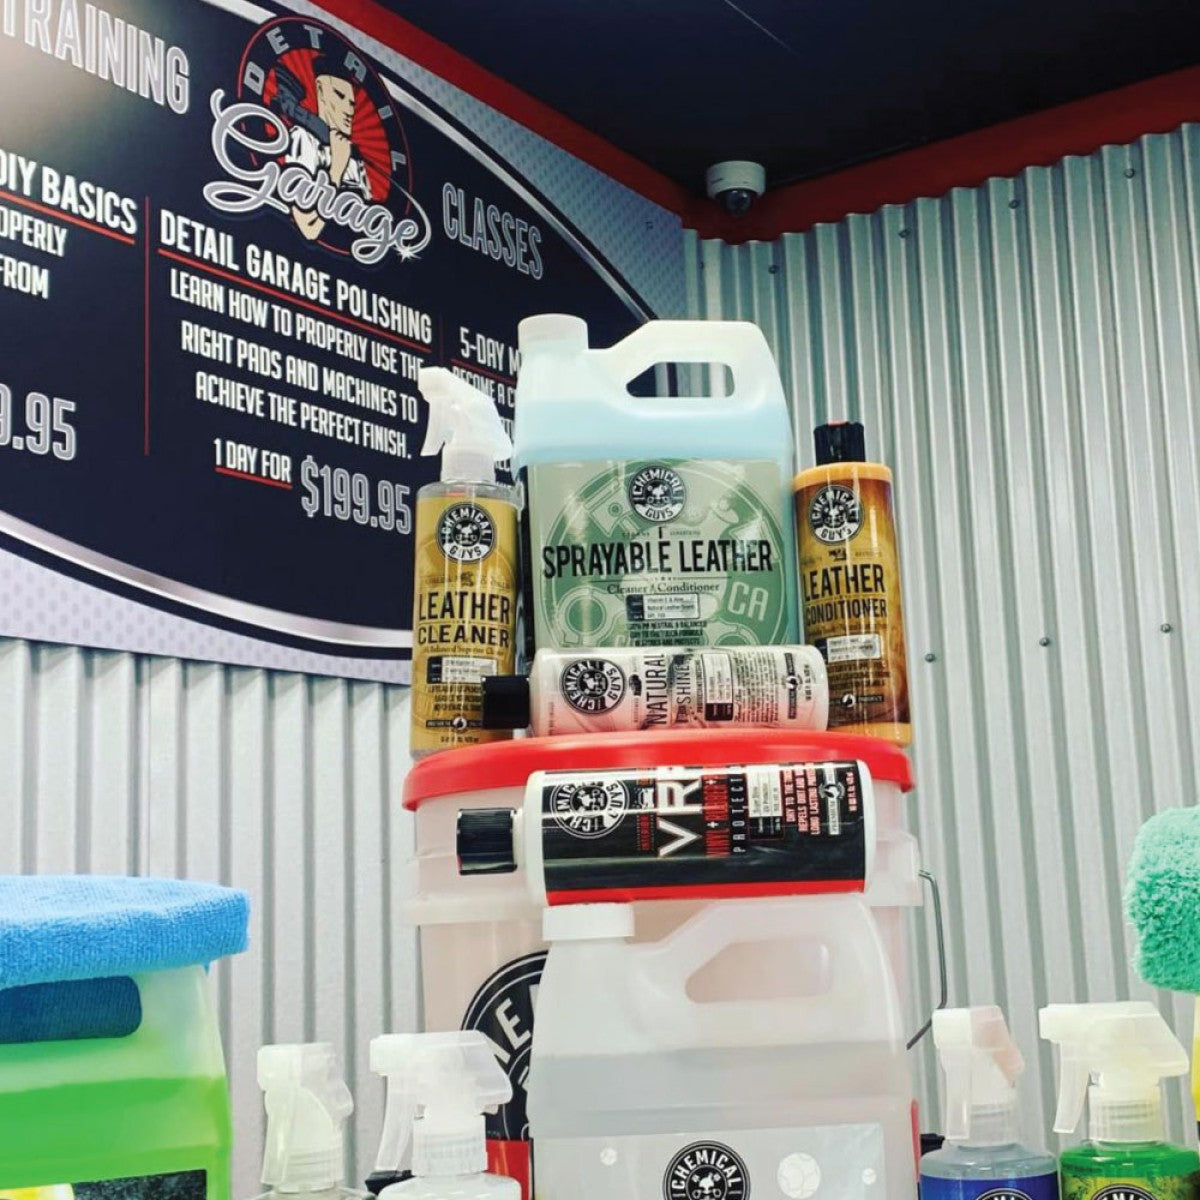 Clean your ride! Chemical Guys car wash kits are on mega sale